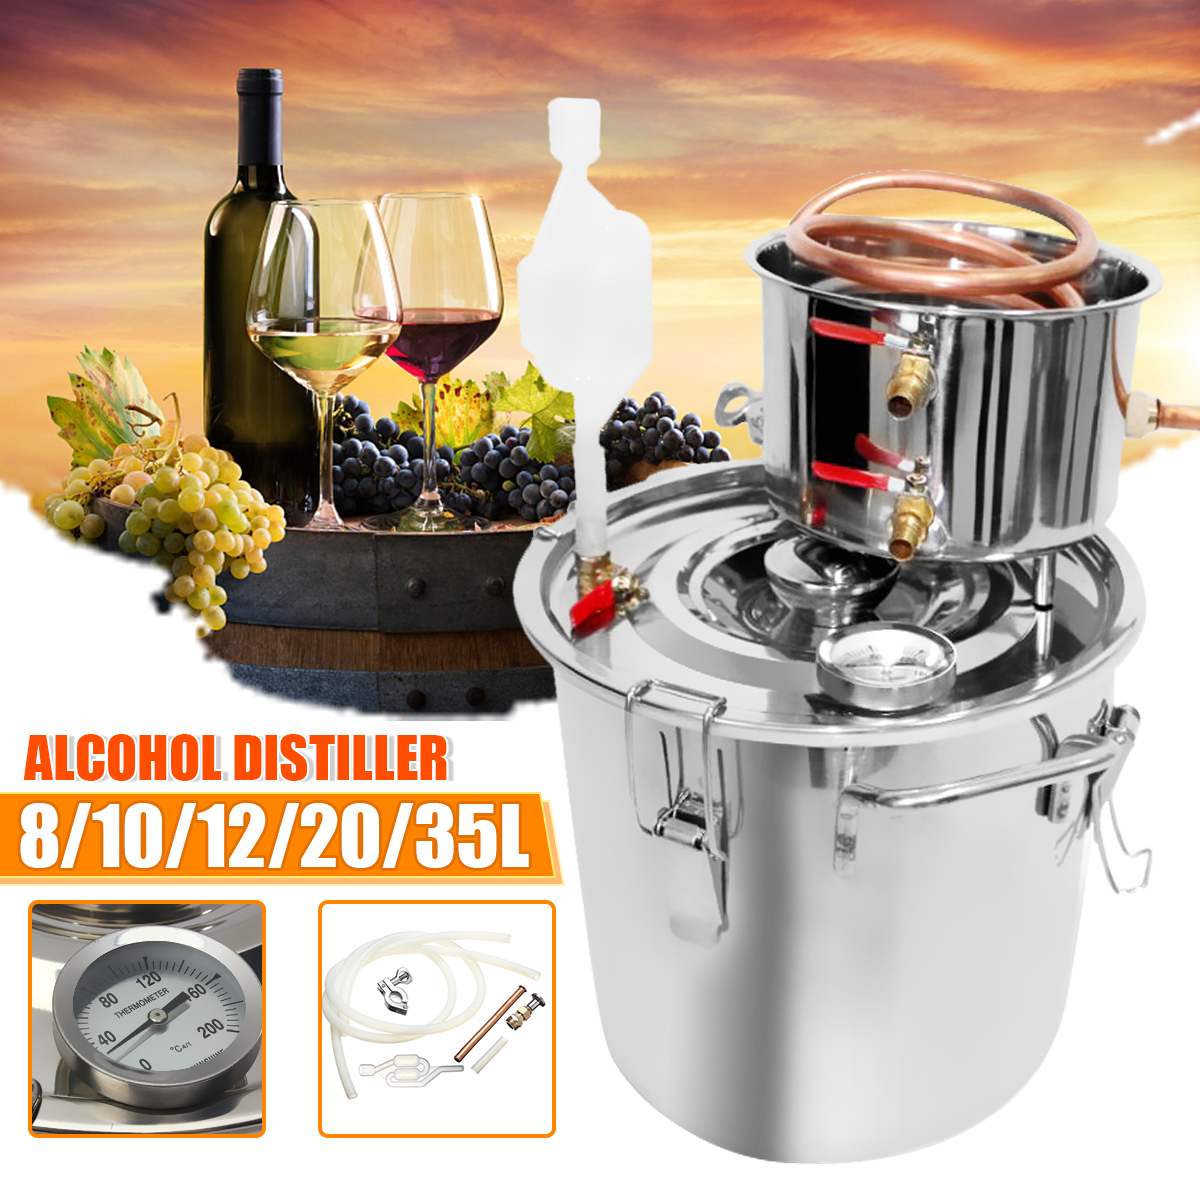 8/10/12/20/35L Durable Distiller Moonshine Alcohol Stainless Copper DIY Home Water Wine Essential Oil Brewing Kit